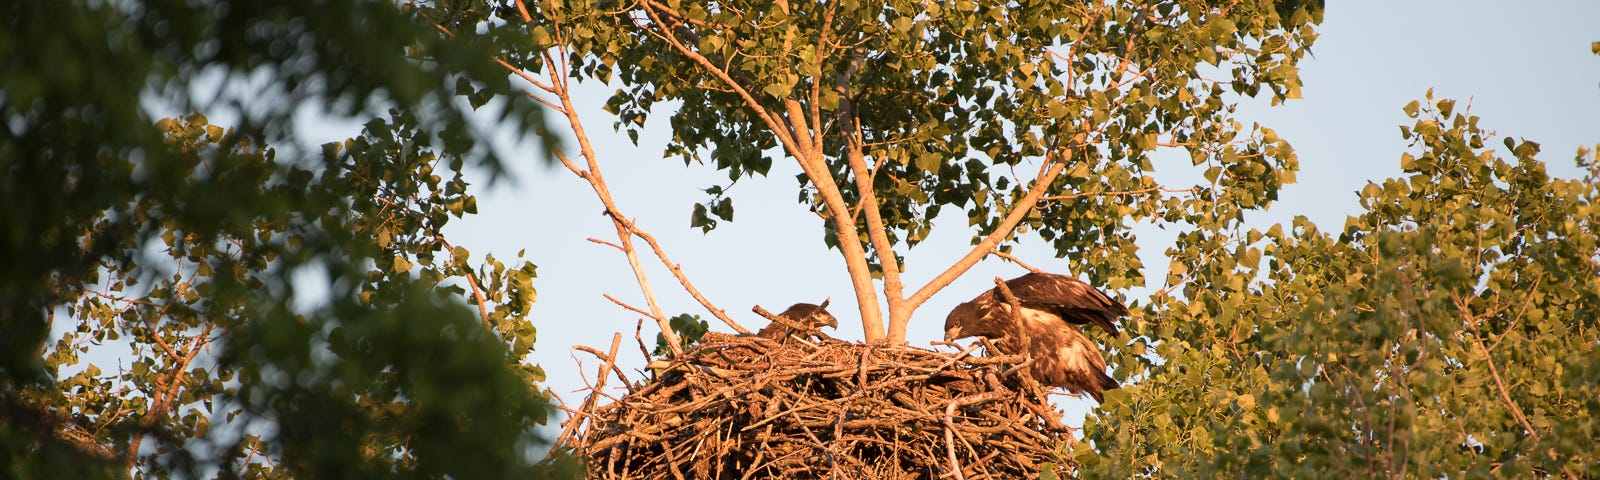 Two bald eagle eaglets in their family’s nest on June 6, 2016.